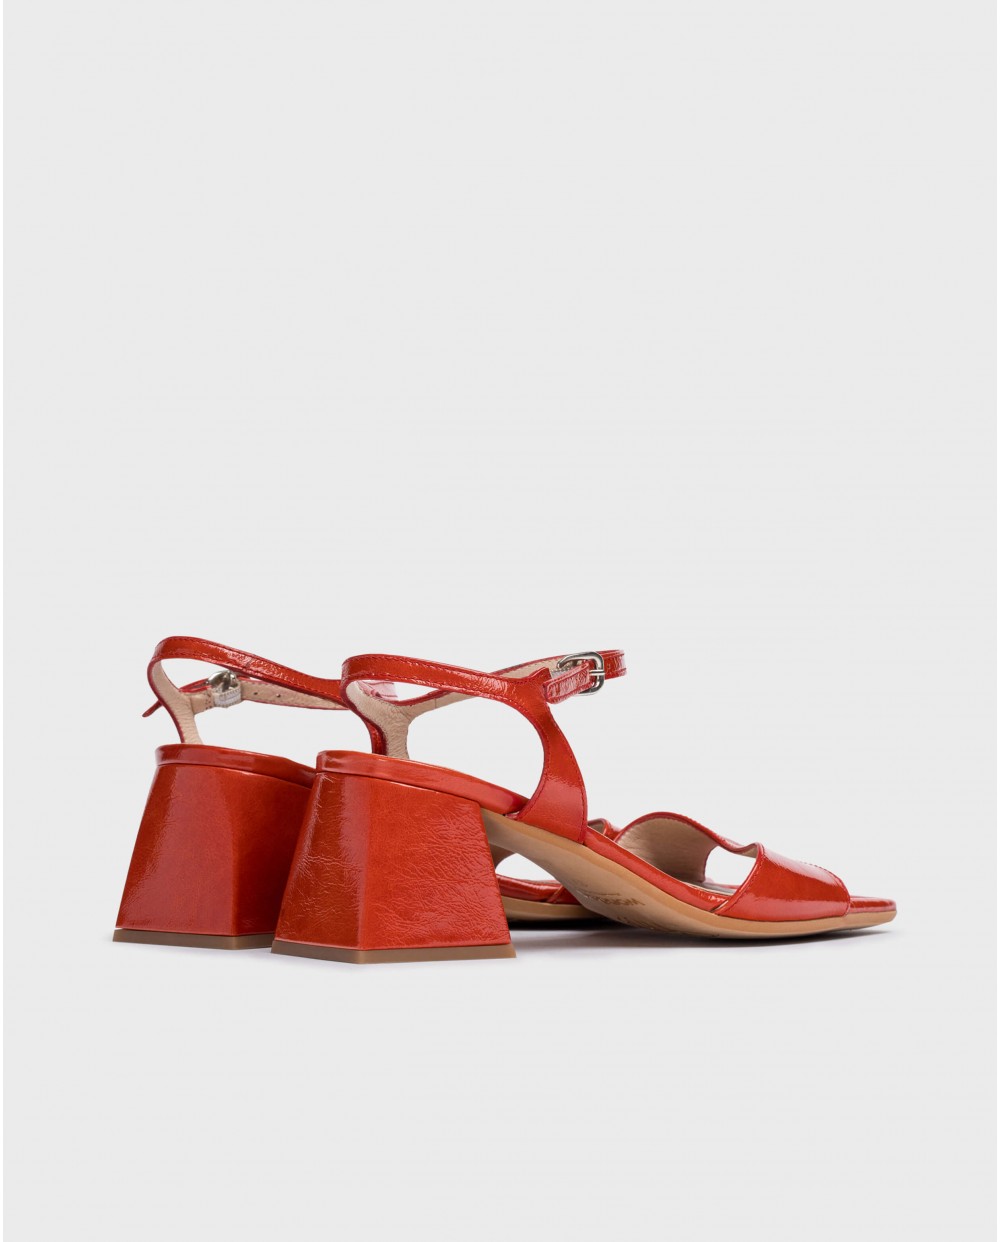 Wonders-Women shoes-Red Isabel heeled sandals